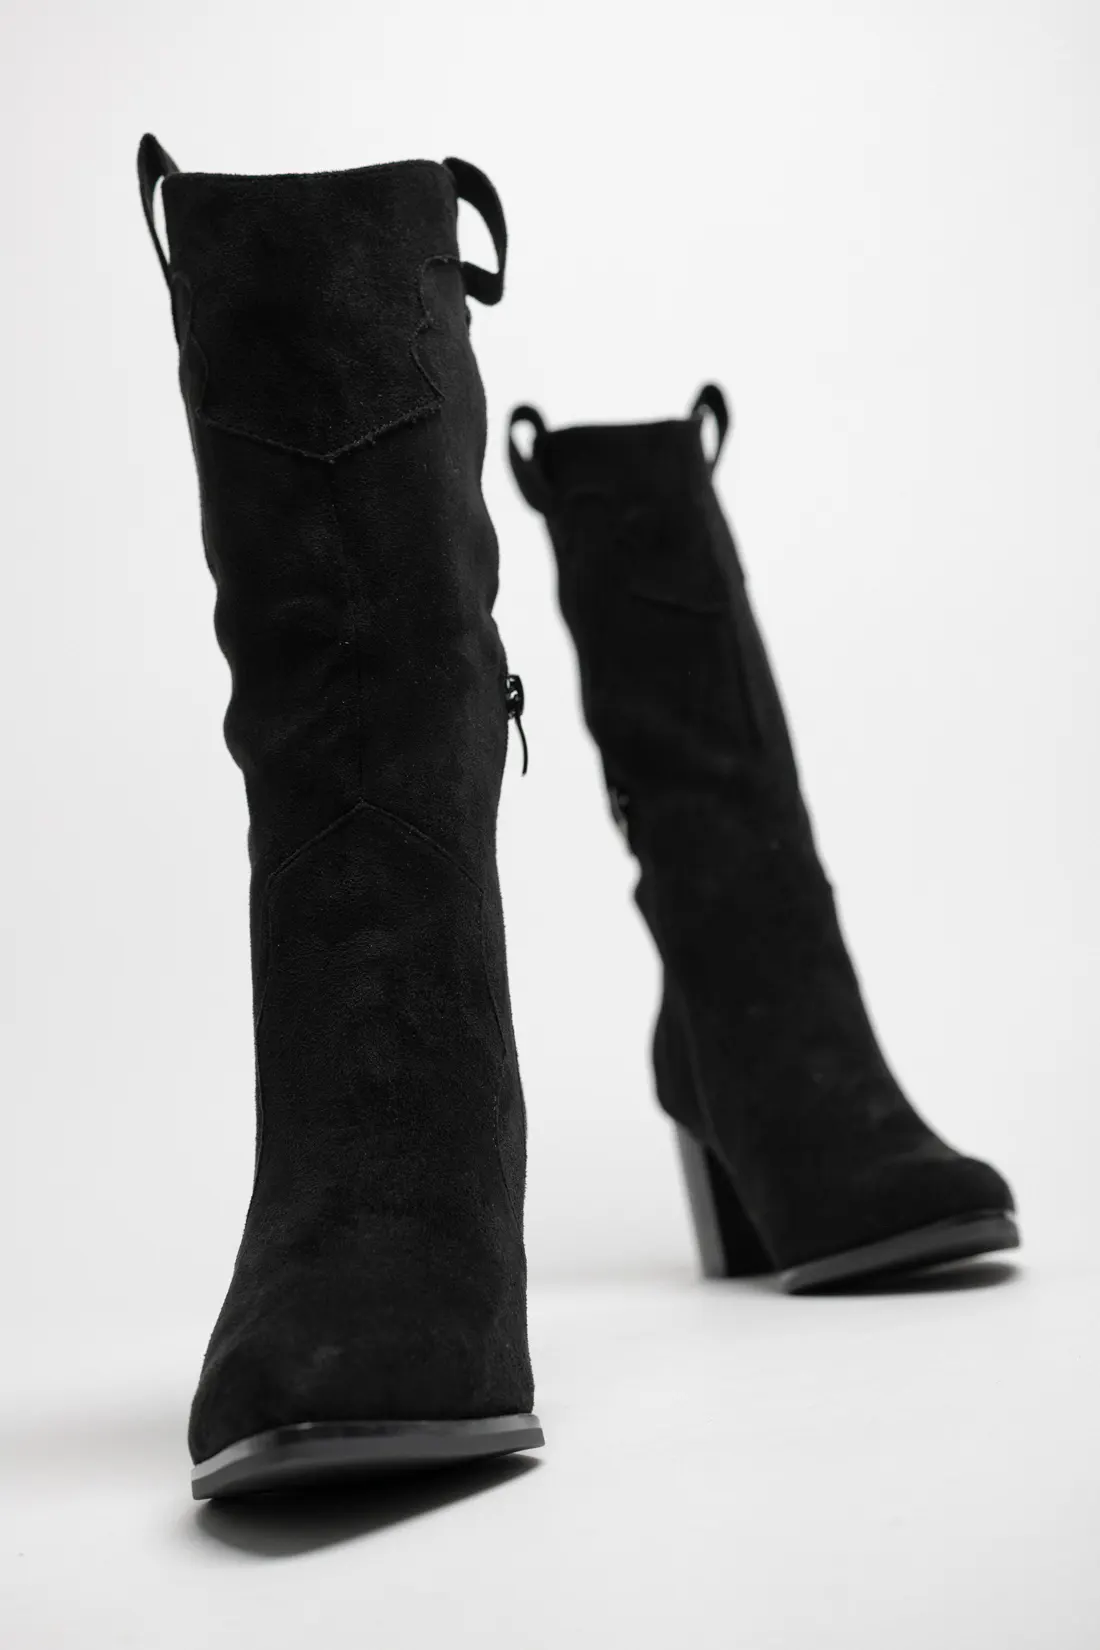 TEQUIL HIGH BOOT - BLACK